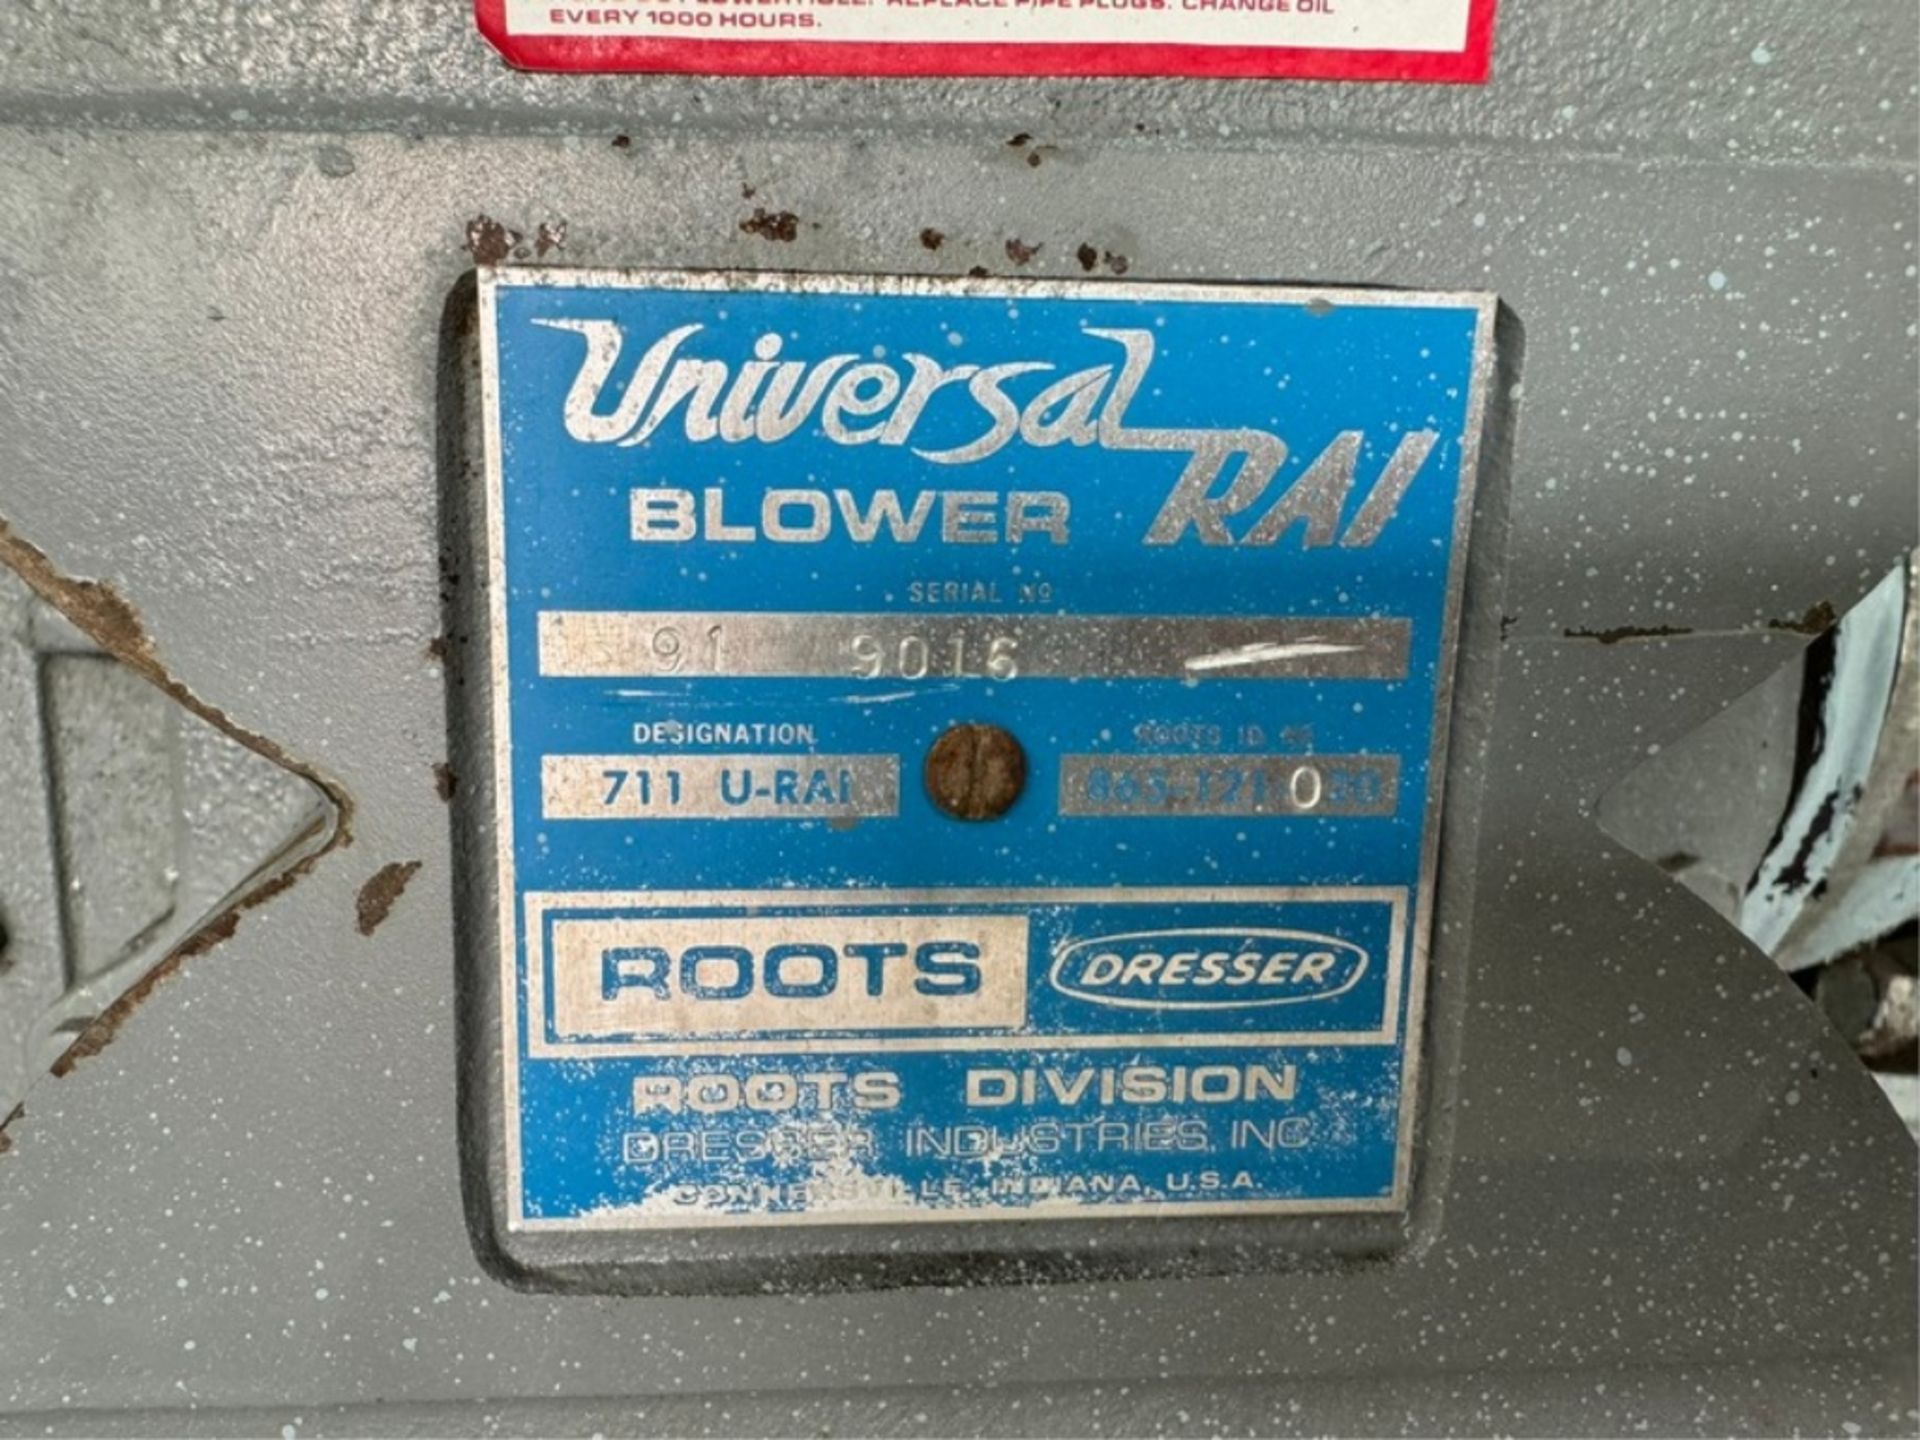 Universal 30 hp Blower, S/N 91 9016, Reliance 1765 RPM, 230/460 Volts, 3 Phase (INV#99694) ( - Image 3 of 6